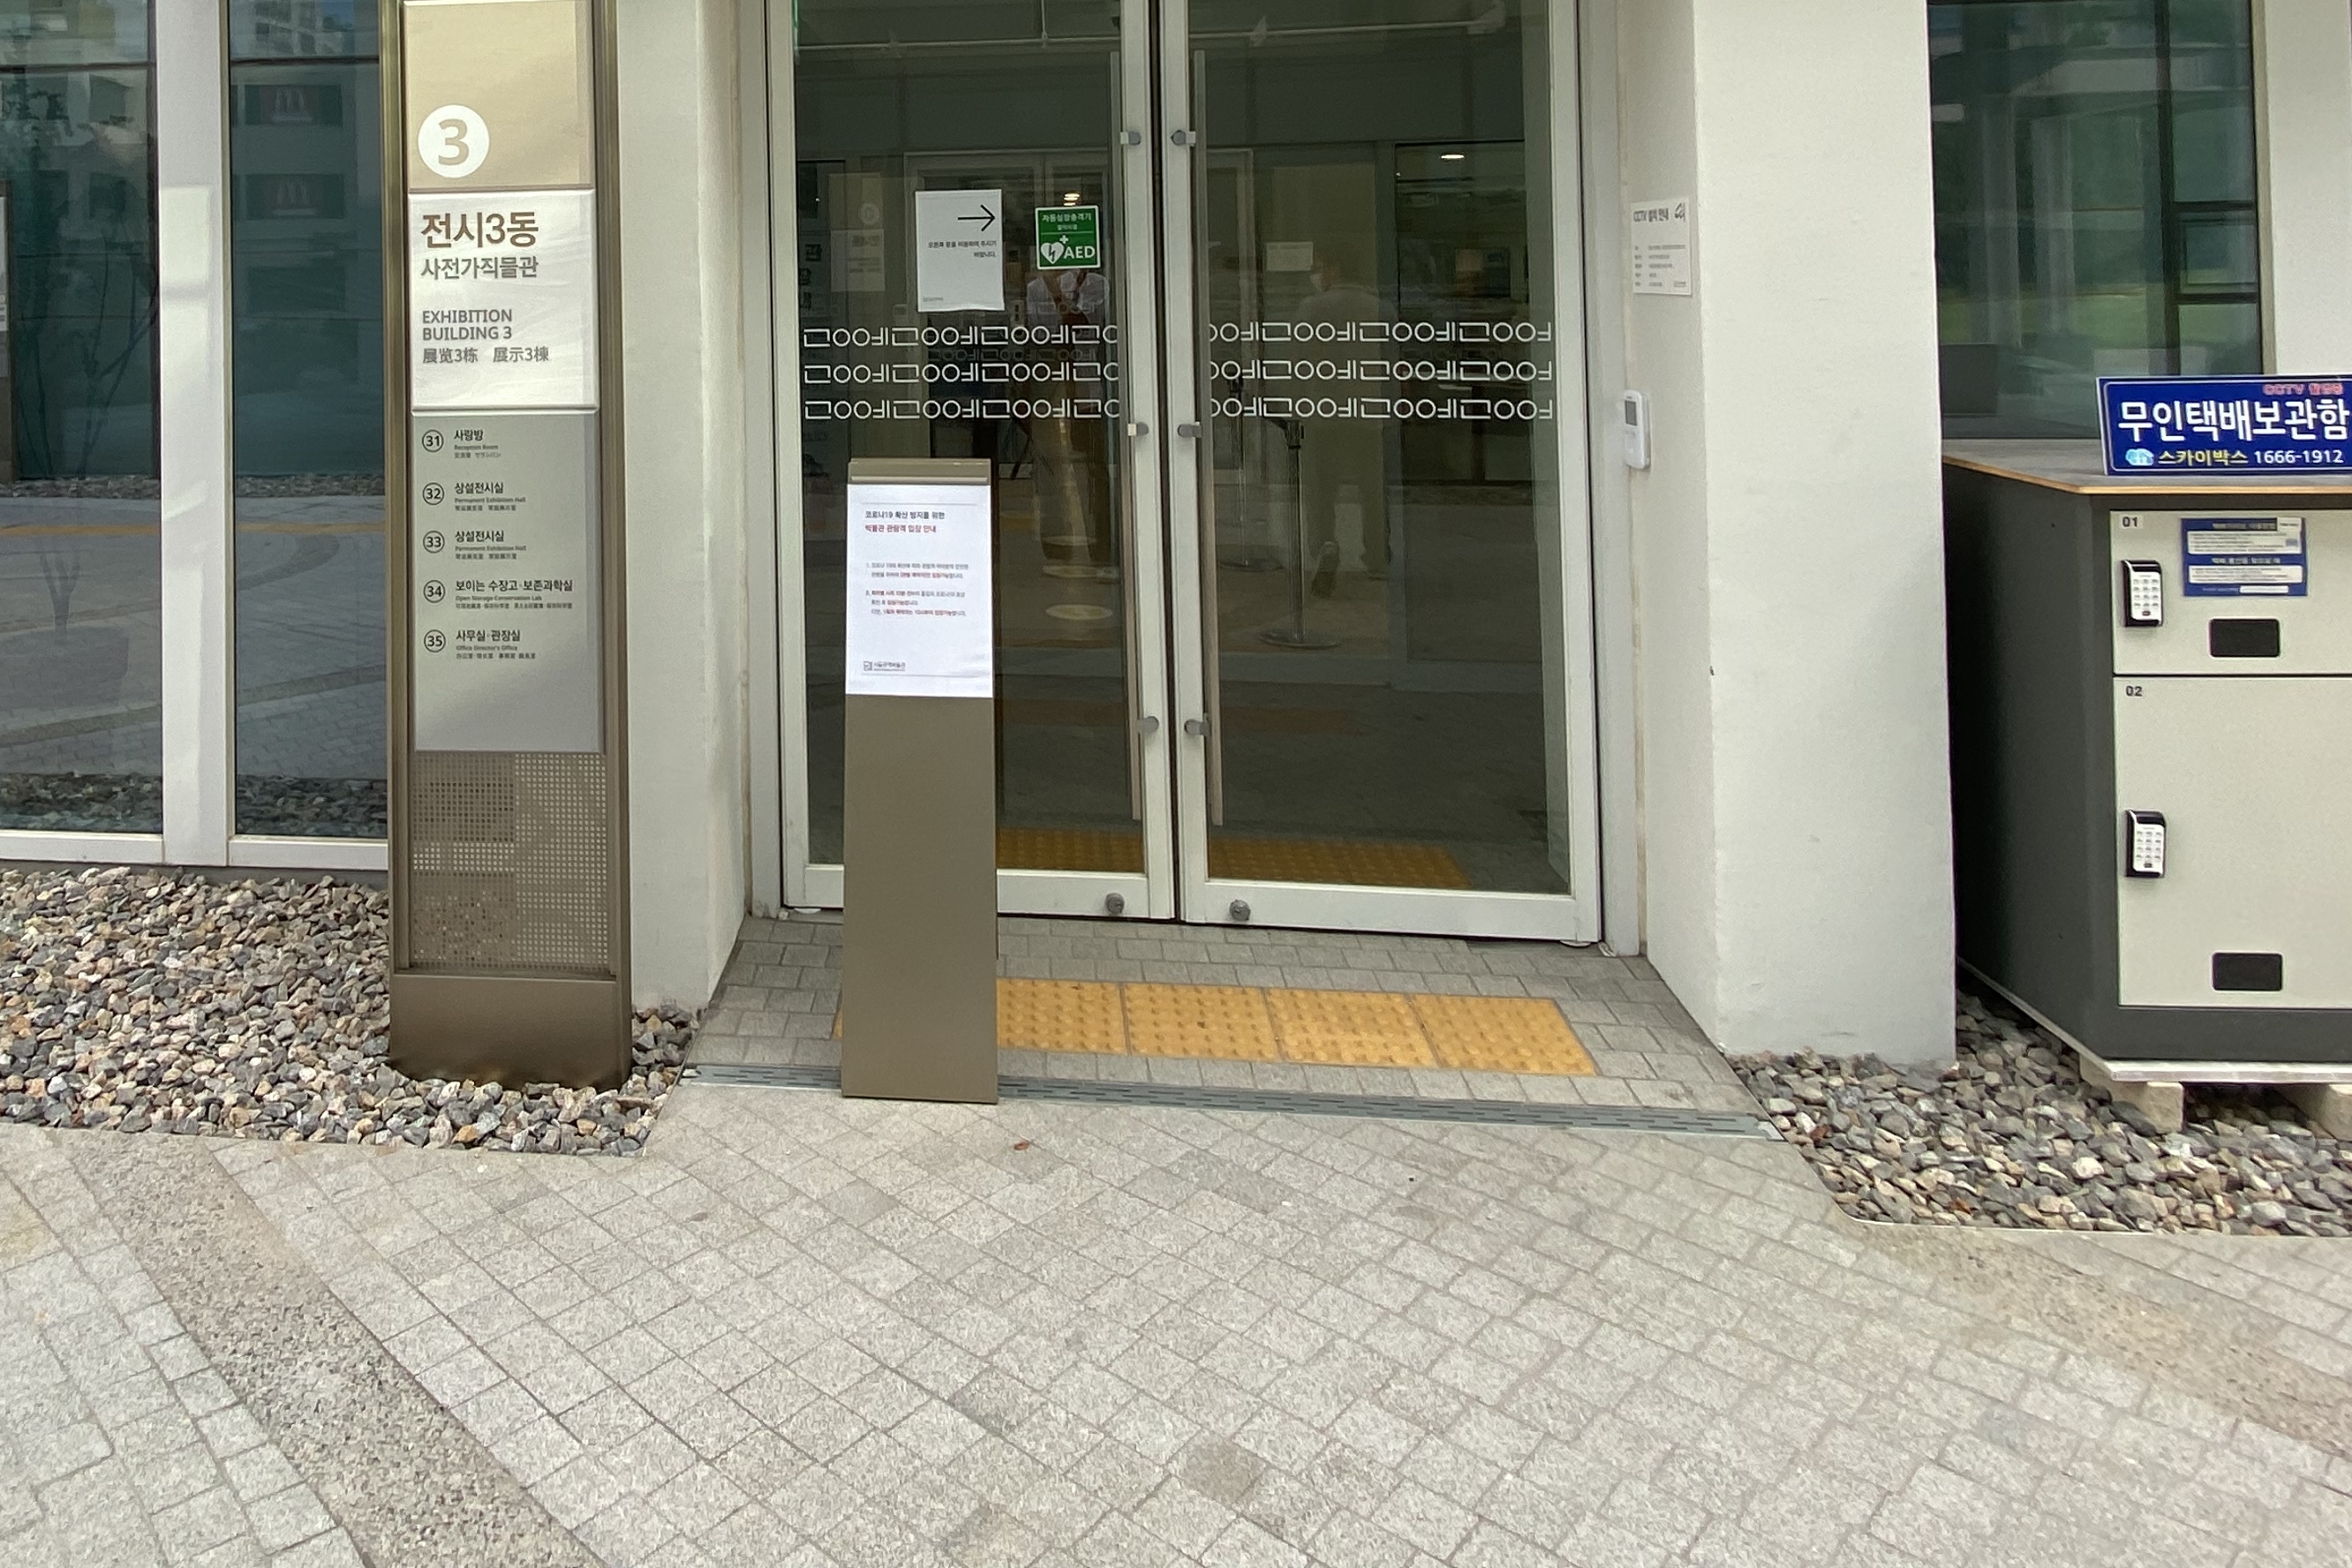 Entryway/ Main entrance0 : Main entrance of building with tactile paving
